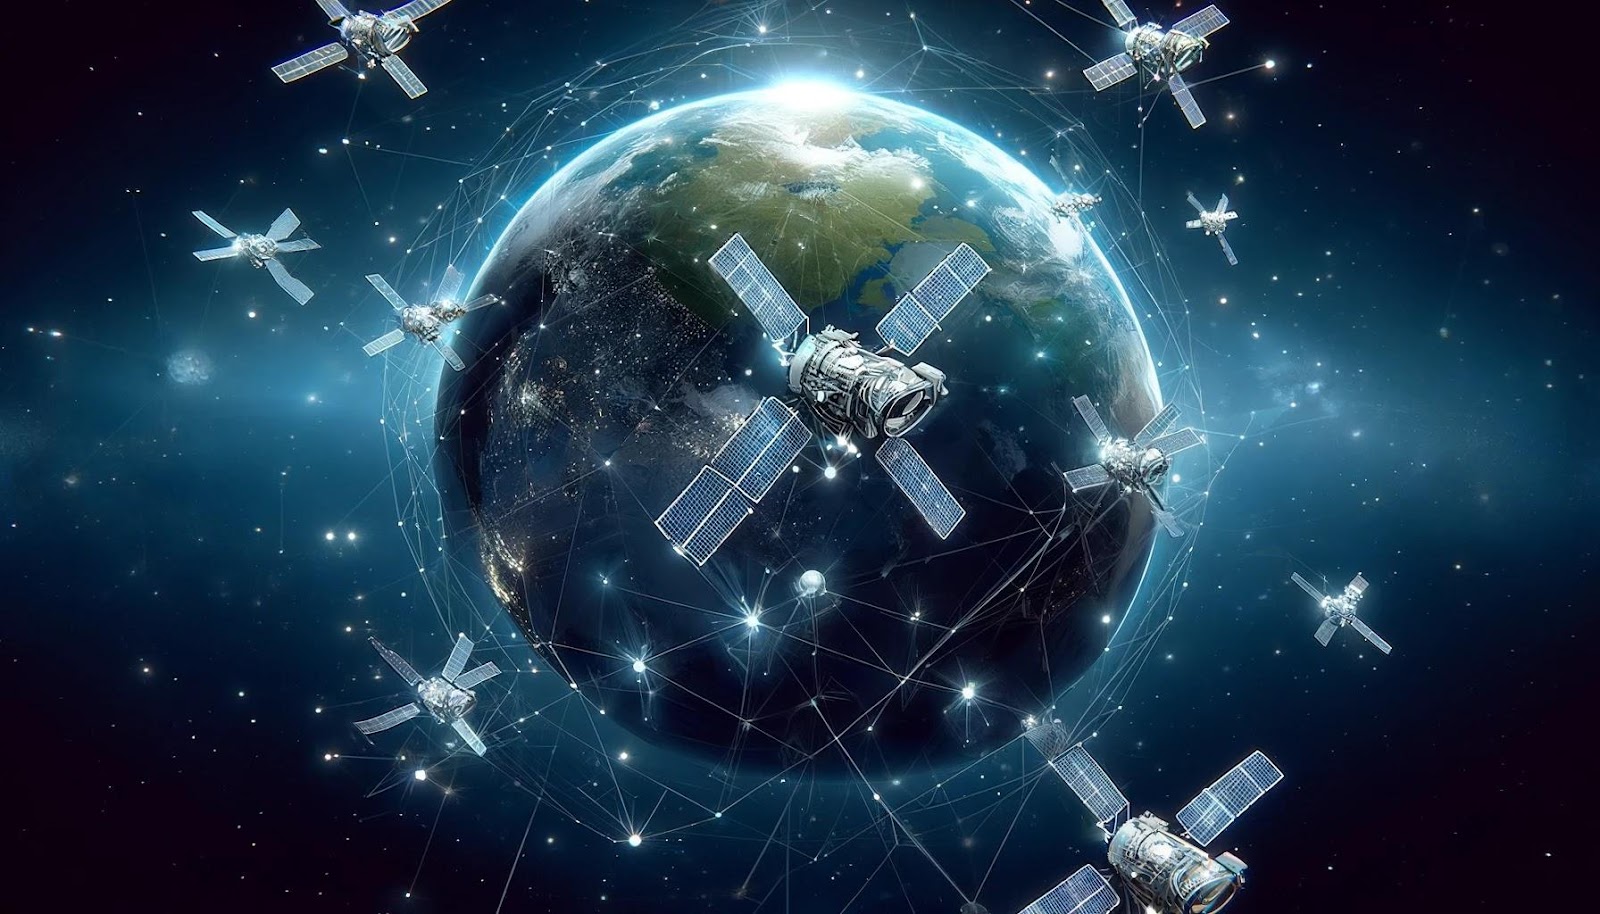 Looking to the future, Starlink is poised to play a pivotal role in shaping the landscape of global internet connectivity. With plans to expand the constellation and enhance the service, Starlink aims to provide truly global coverage, including in the polar regions, which have historically been underserved by satellite internet.